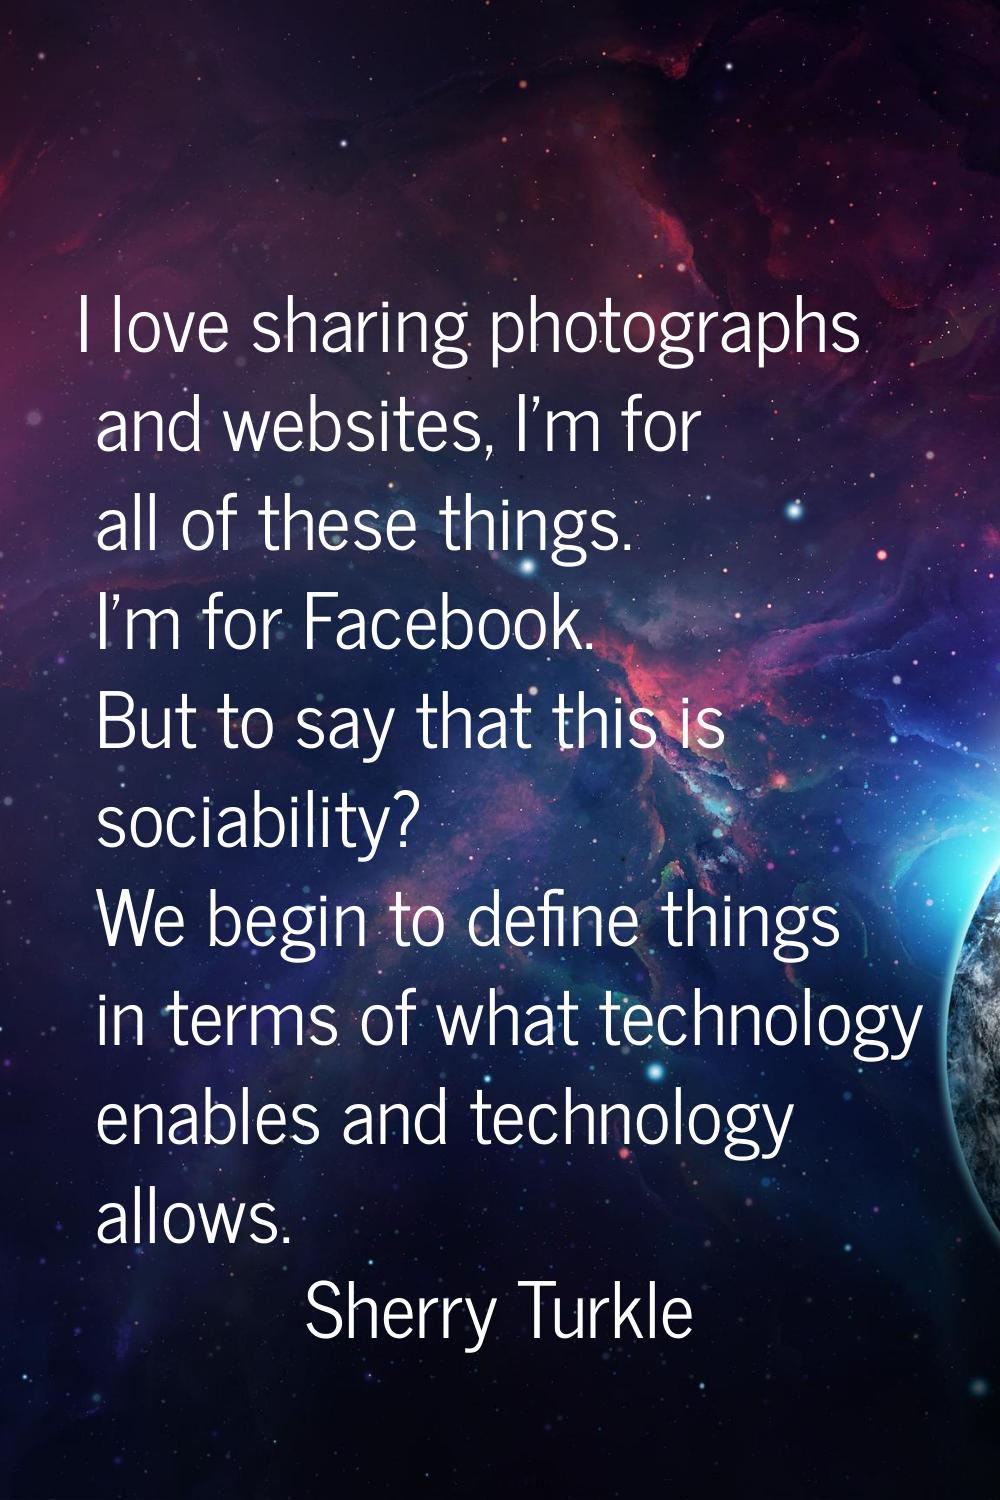 I love sharing photographs and websites, I'm for all of these things. I'm for Facebook. But to say 